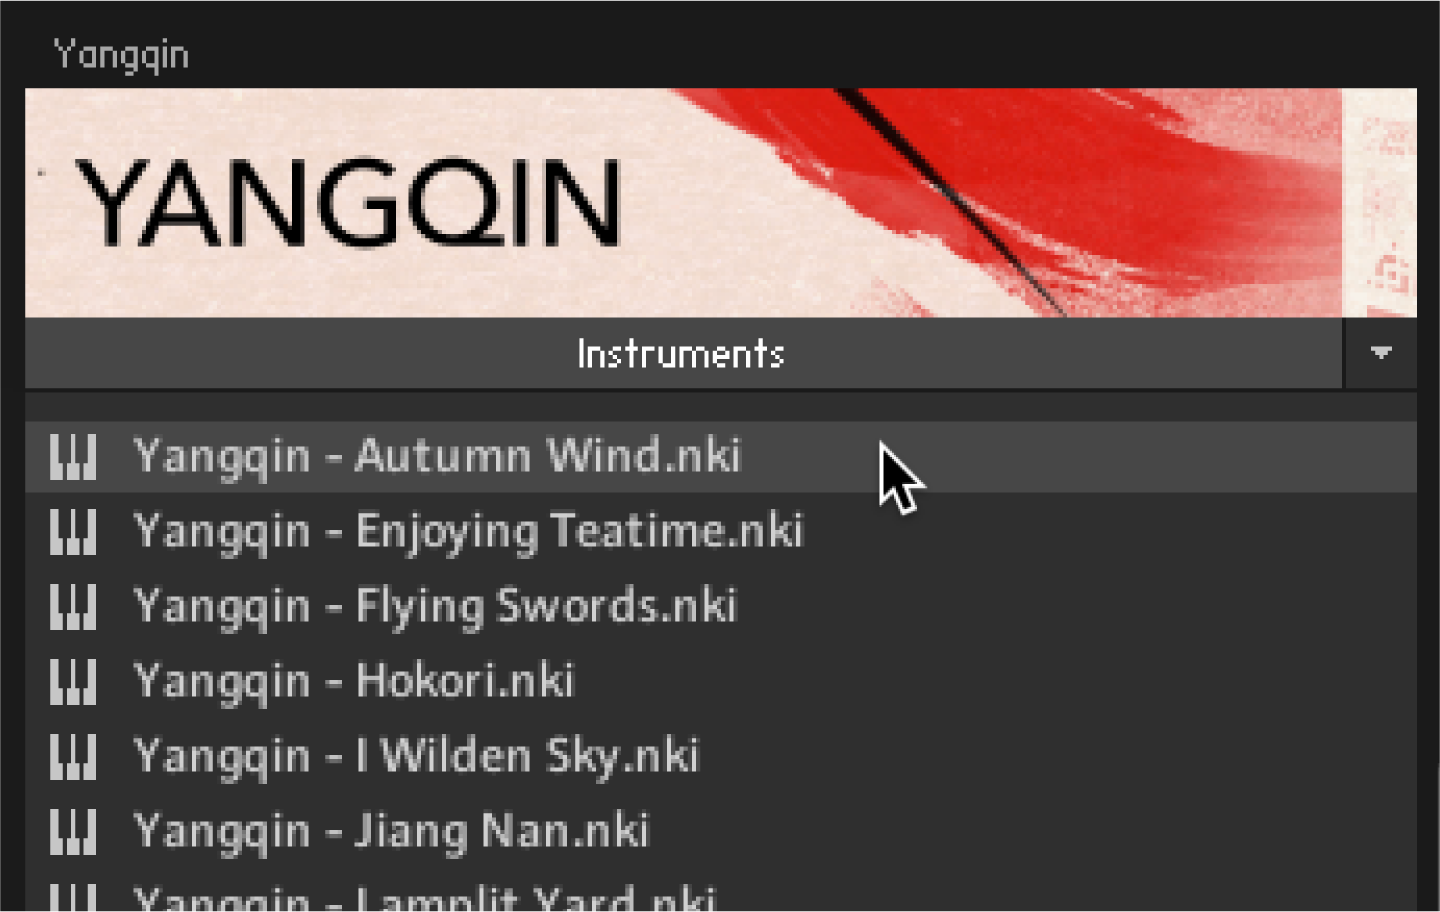 The Yangqin - Autumn Wind instrument highlighted in the browser.